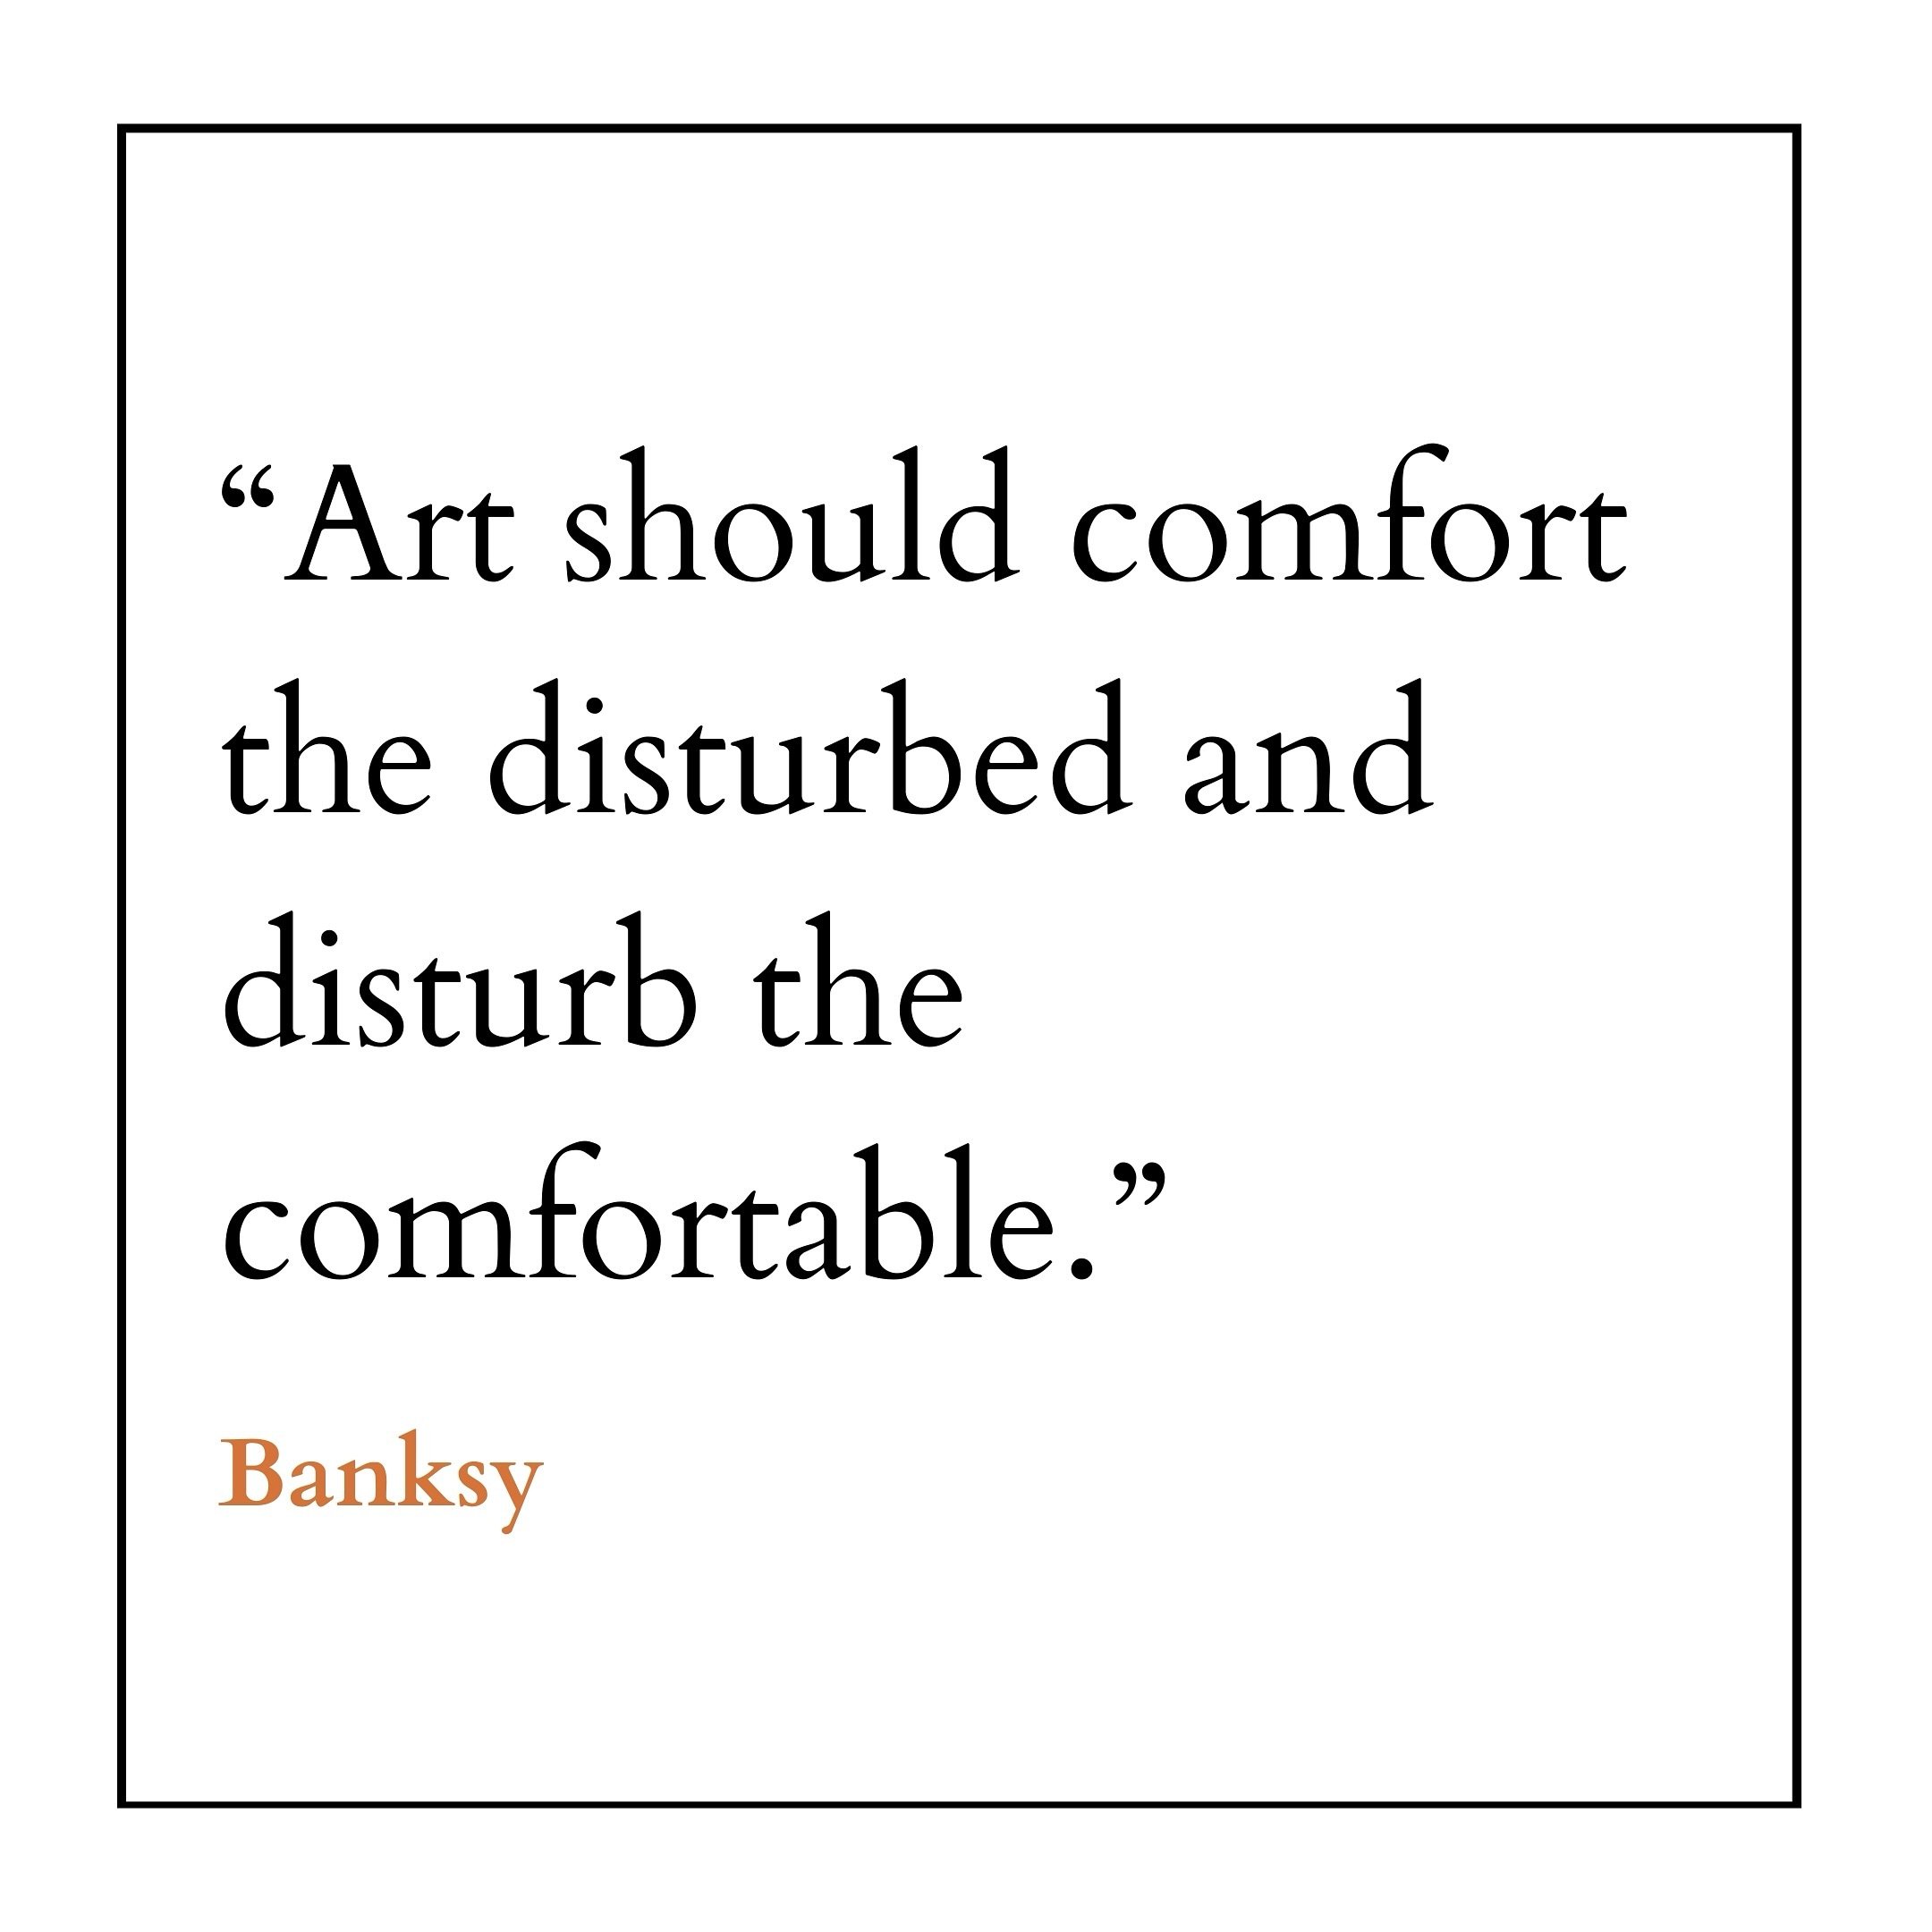 Wisdom courtesy of Banksy...

View our collection of limited edition works by Banksy by visiting our website and feel free to get in touch for more details.